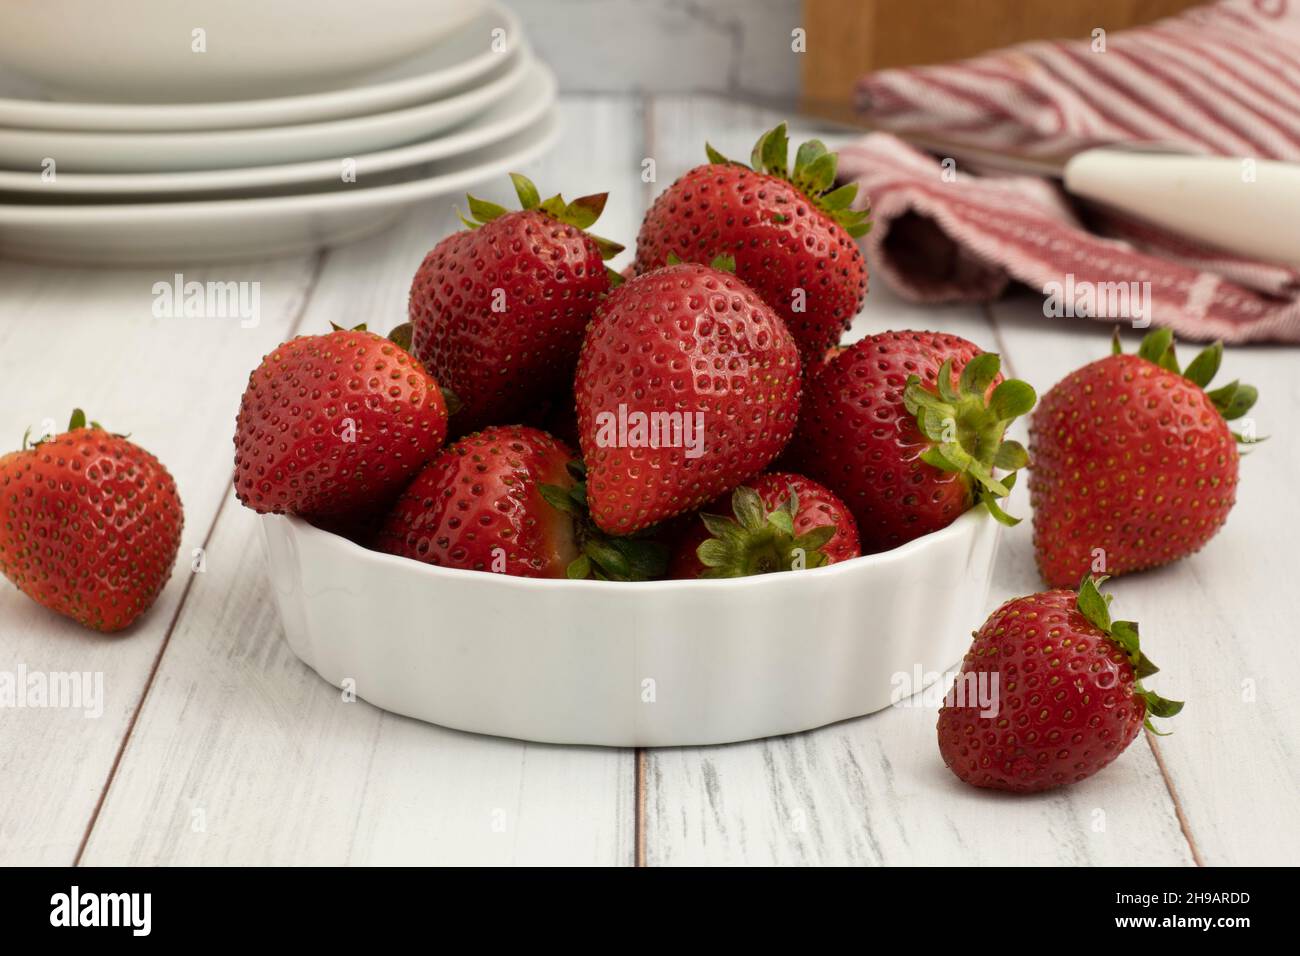 Bowl of fresh ripe strawberries on a wooded table close up Stock Photo